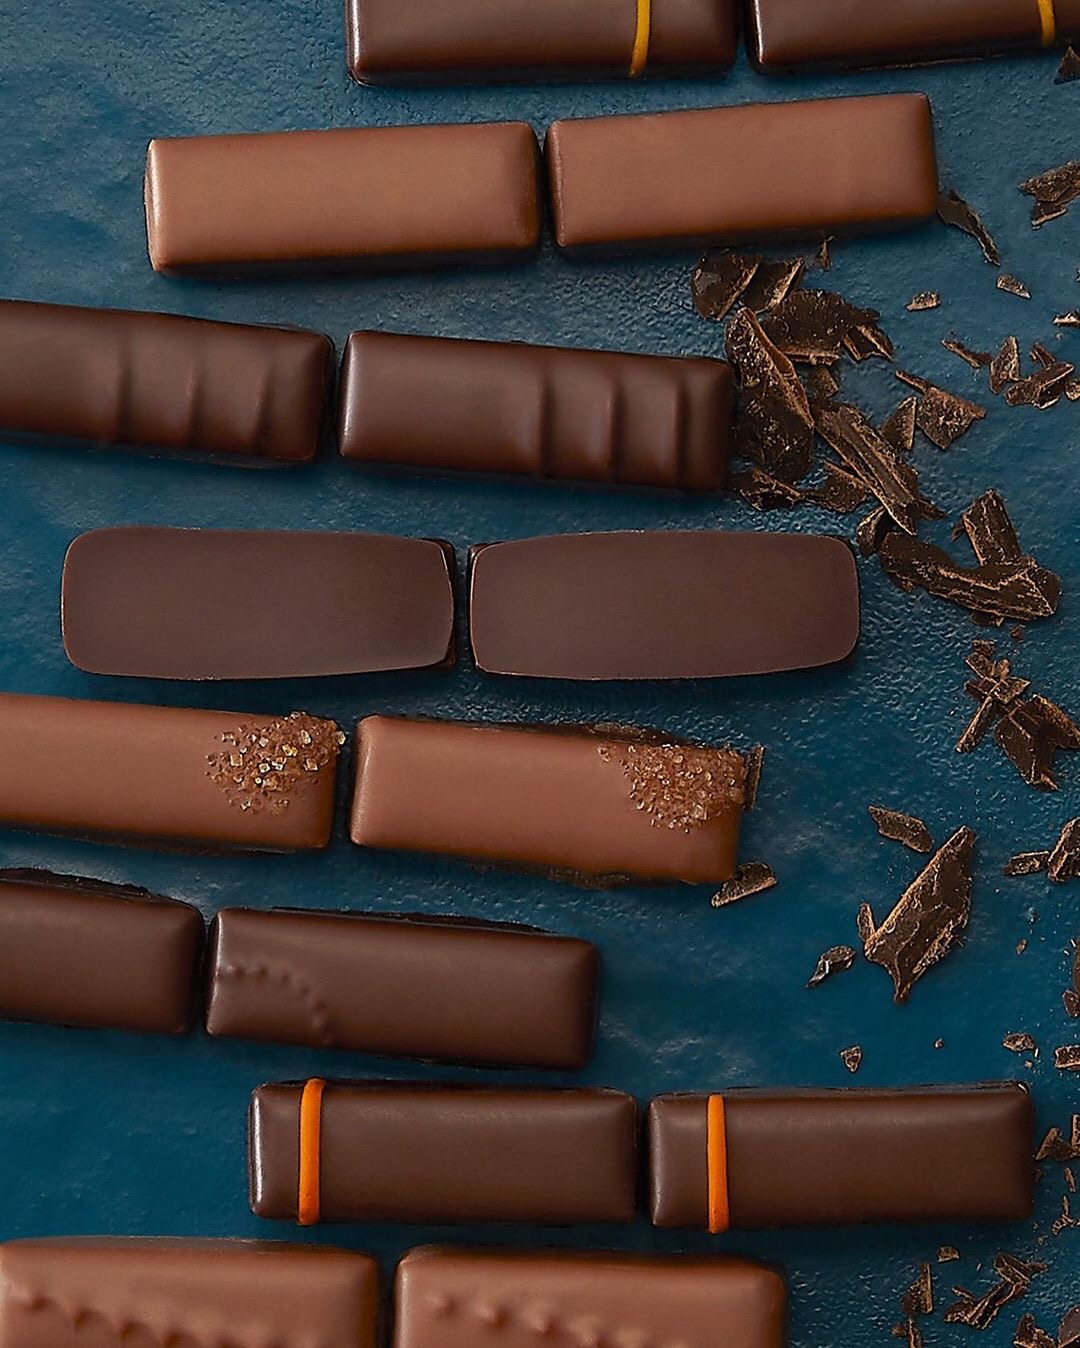 7 Best Brands of Cocoa That Every Baker Should Use ...